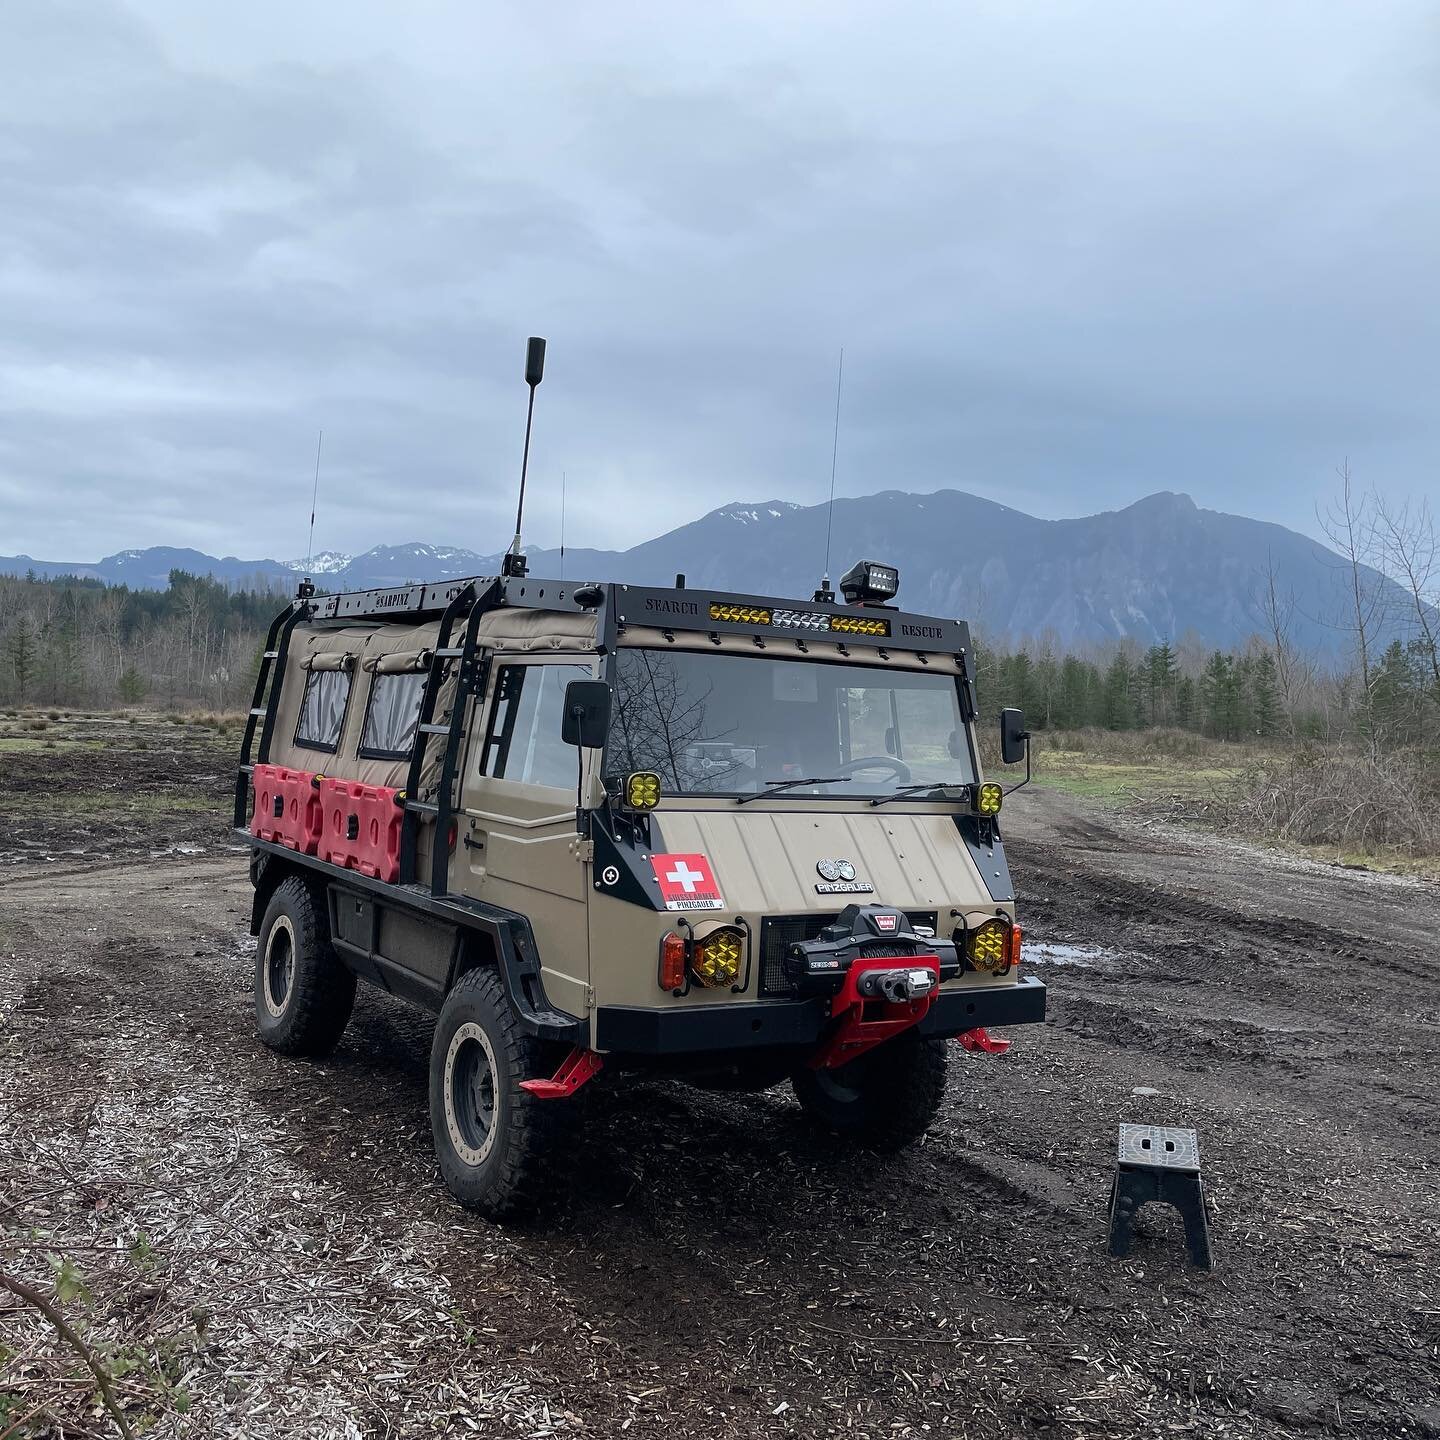 Early morning setup for @avants_offroad driving and recovery training at @dirtfishrally school in Snoqualmie Wa. 

&ldquo;Built to serve, that others may live.&rdquo;

___________________________

#searchandrescue #swissarmy #pinzgauer #4x4 #custom #